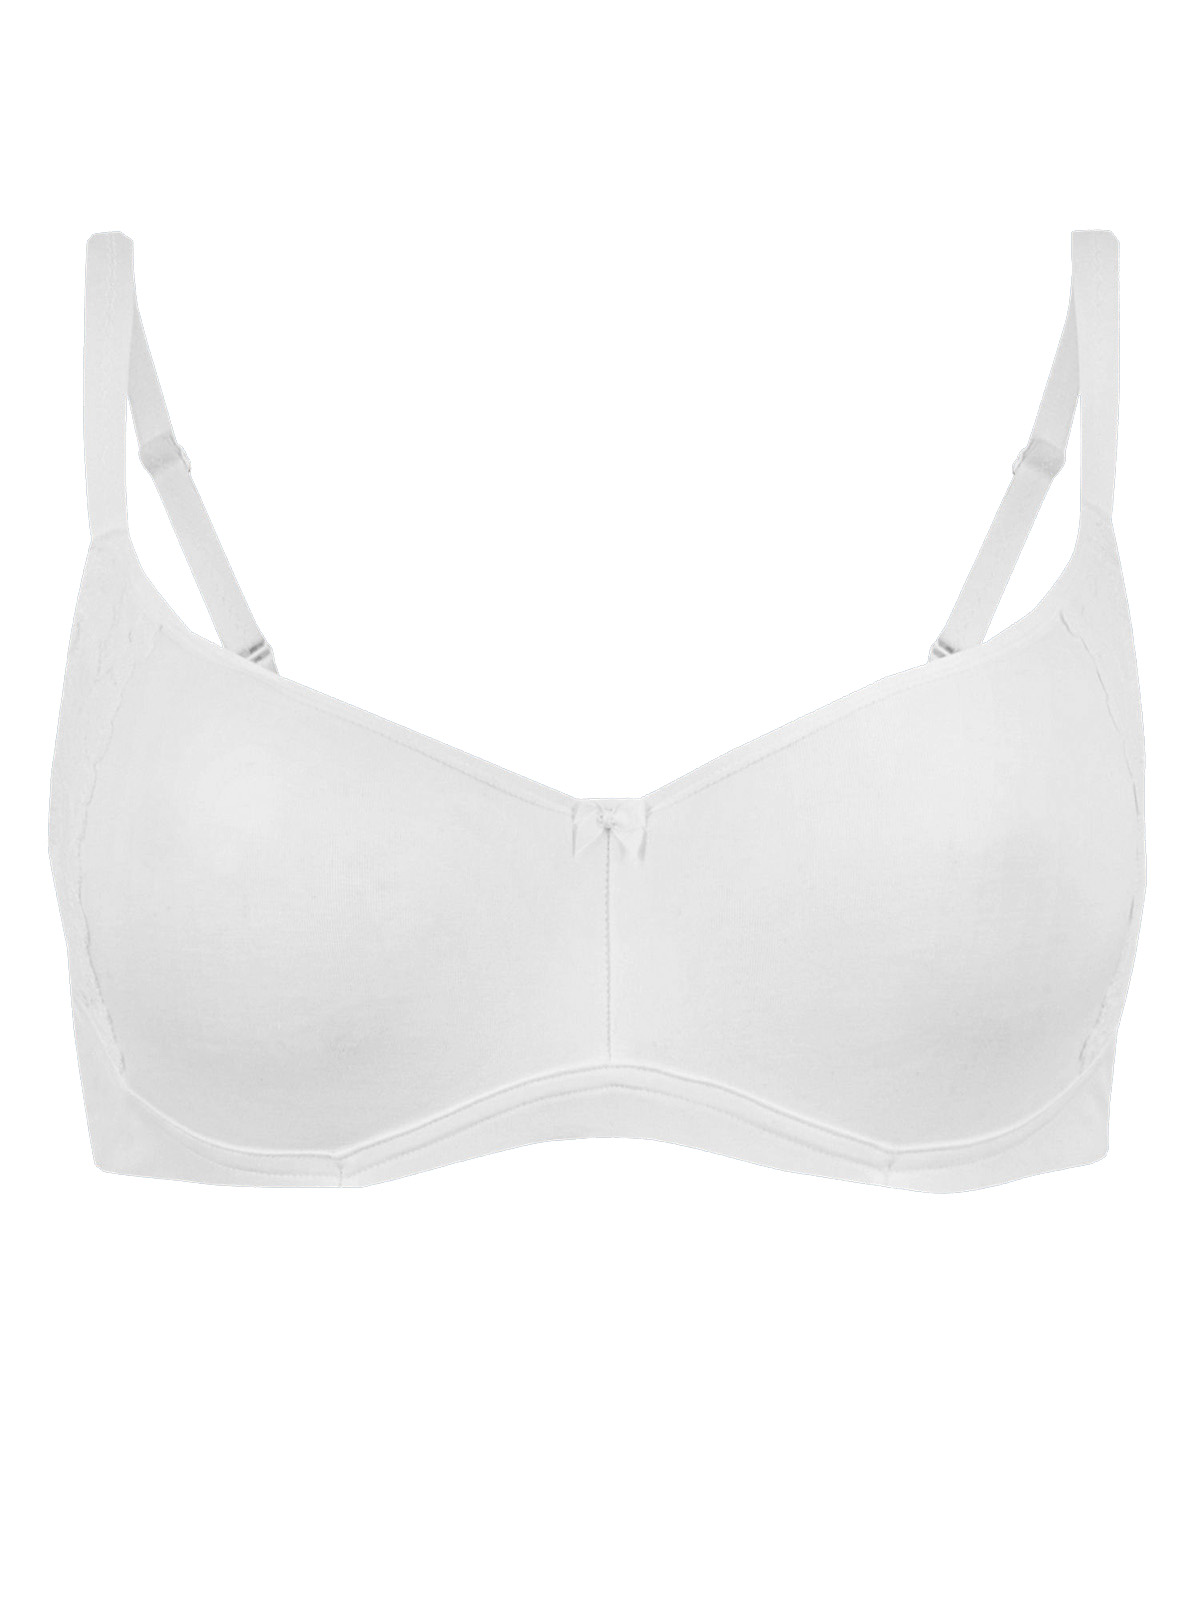  - - WHITE Cotton Rich Cool Comfort Smoothing Full Cup Bra - Size 34 to  42 (A-B-C